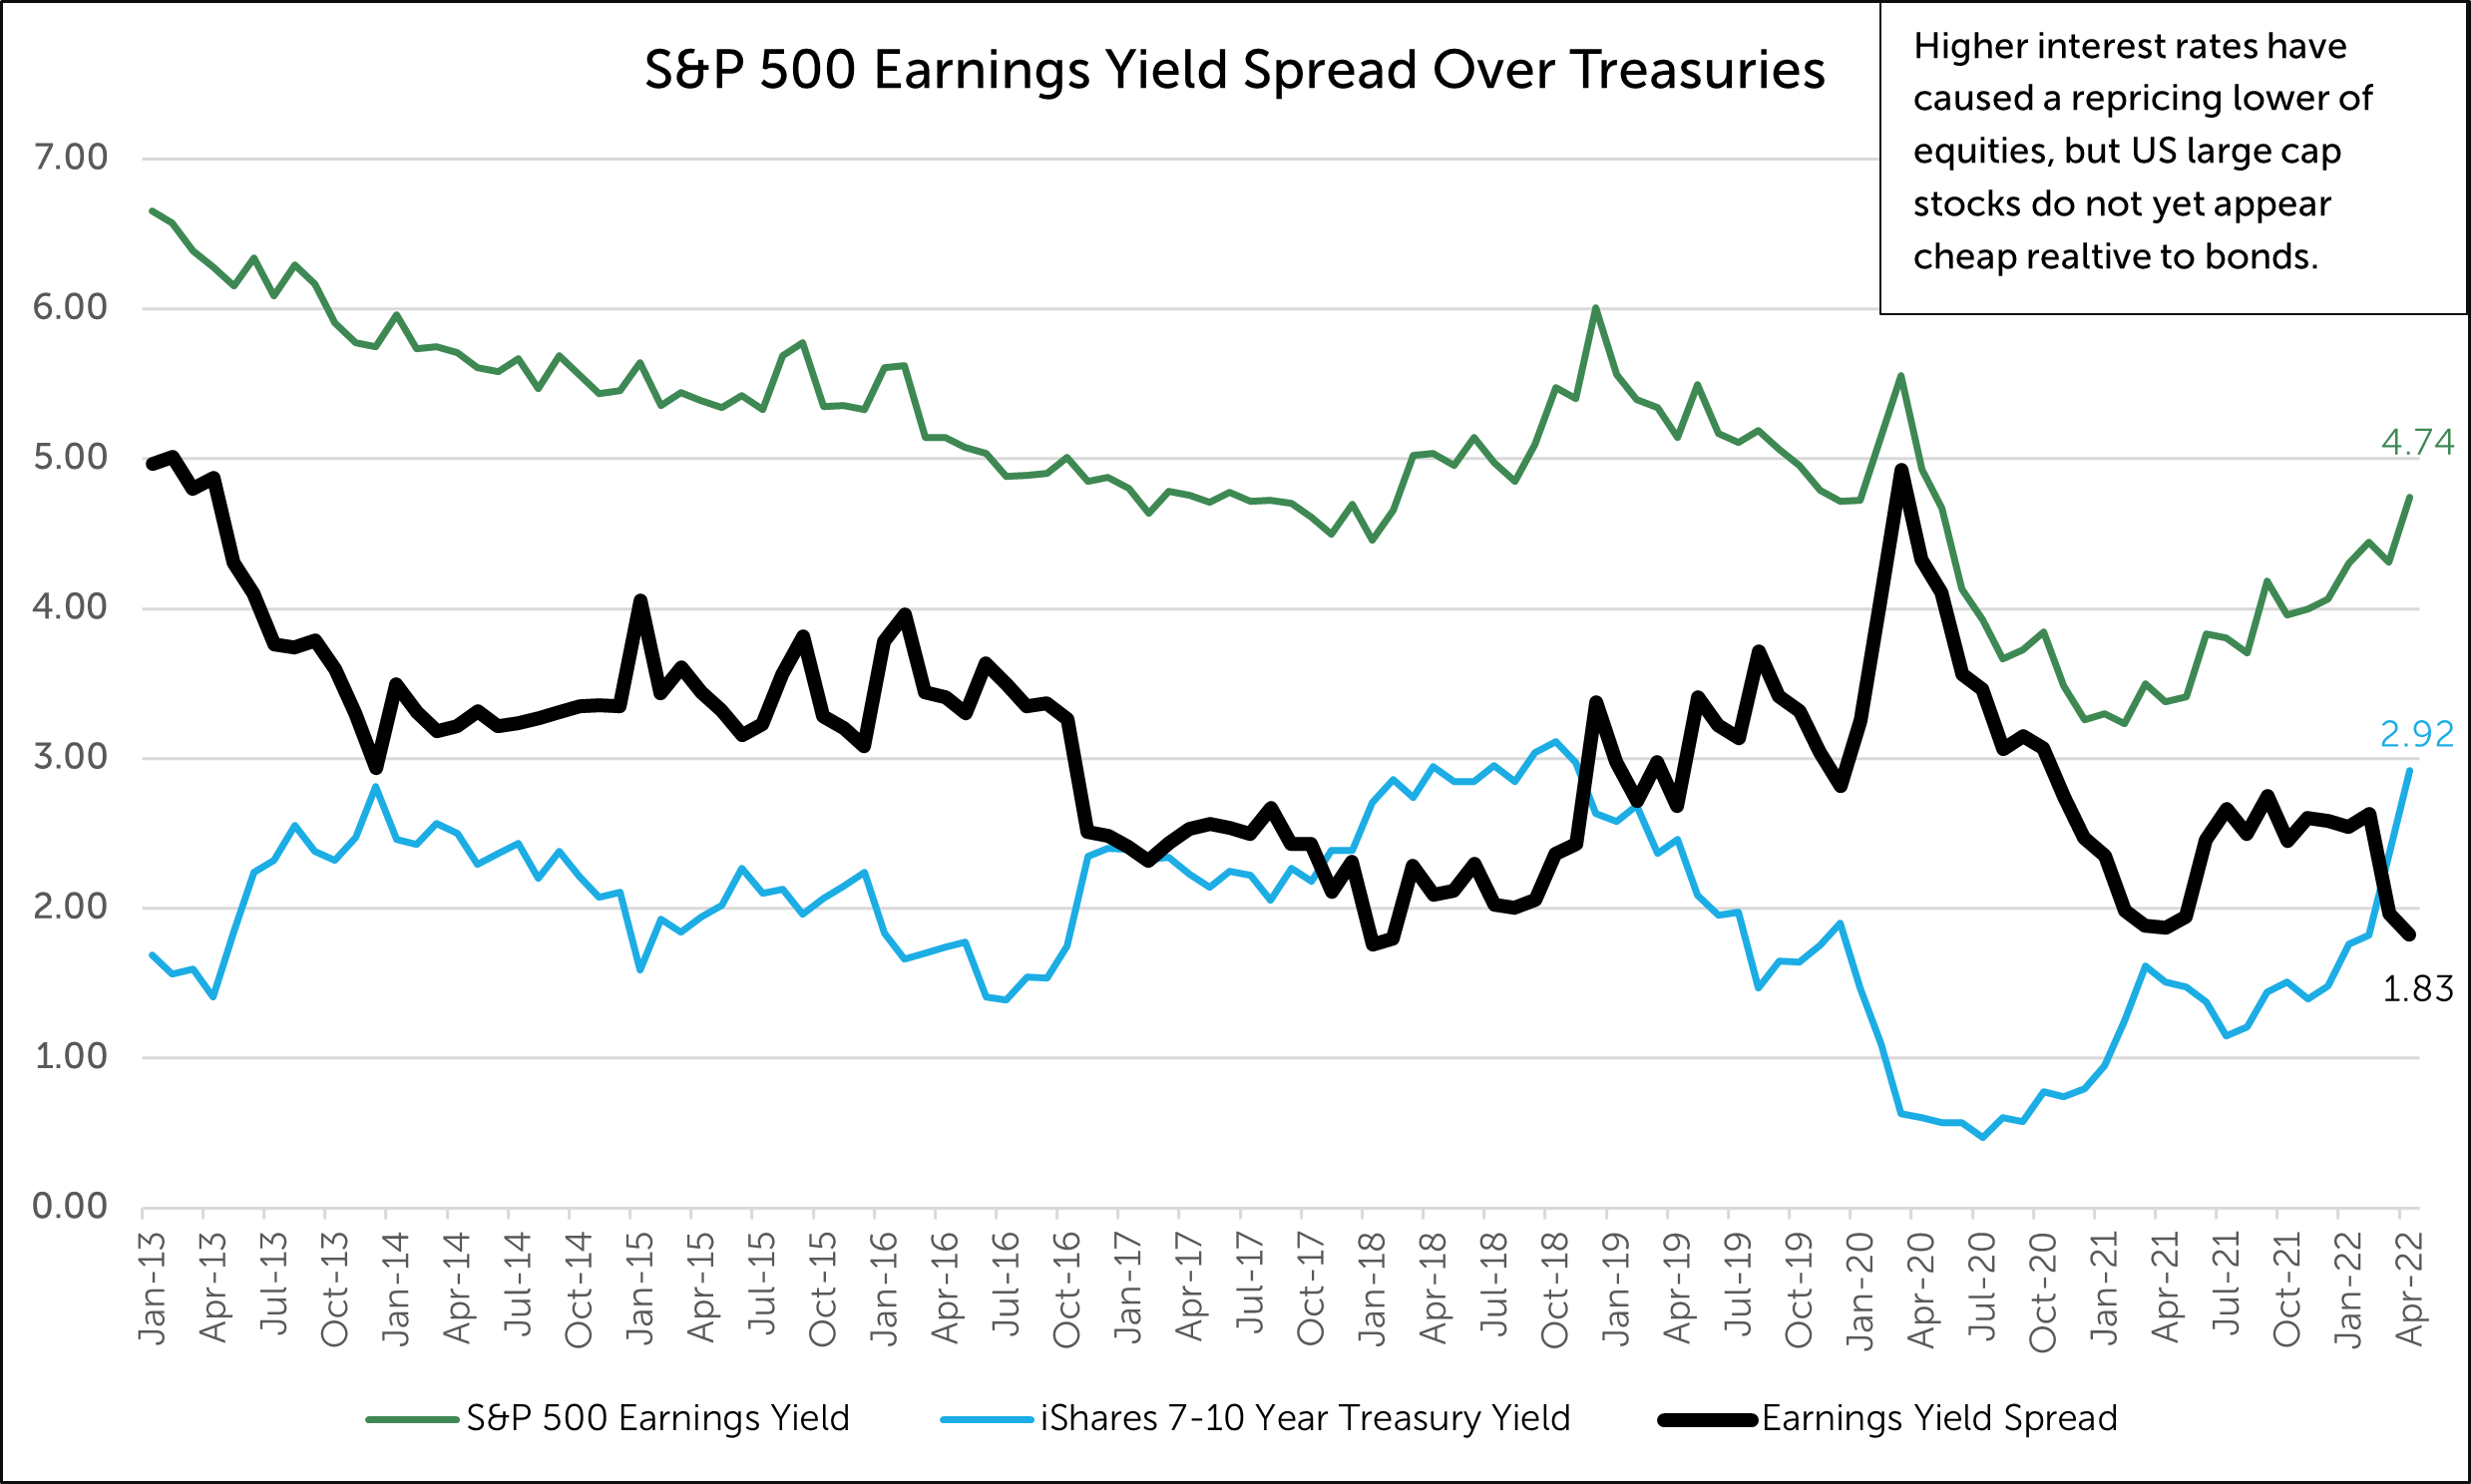 Line graphs depicting S&P 500 Earnings Yield Spread Over Treasuries